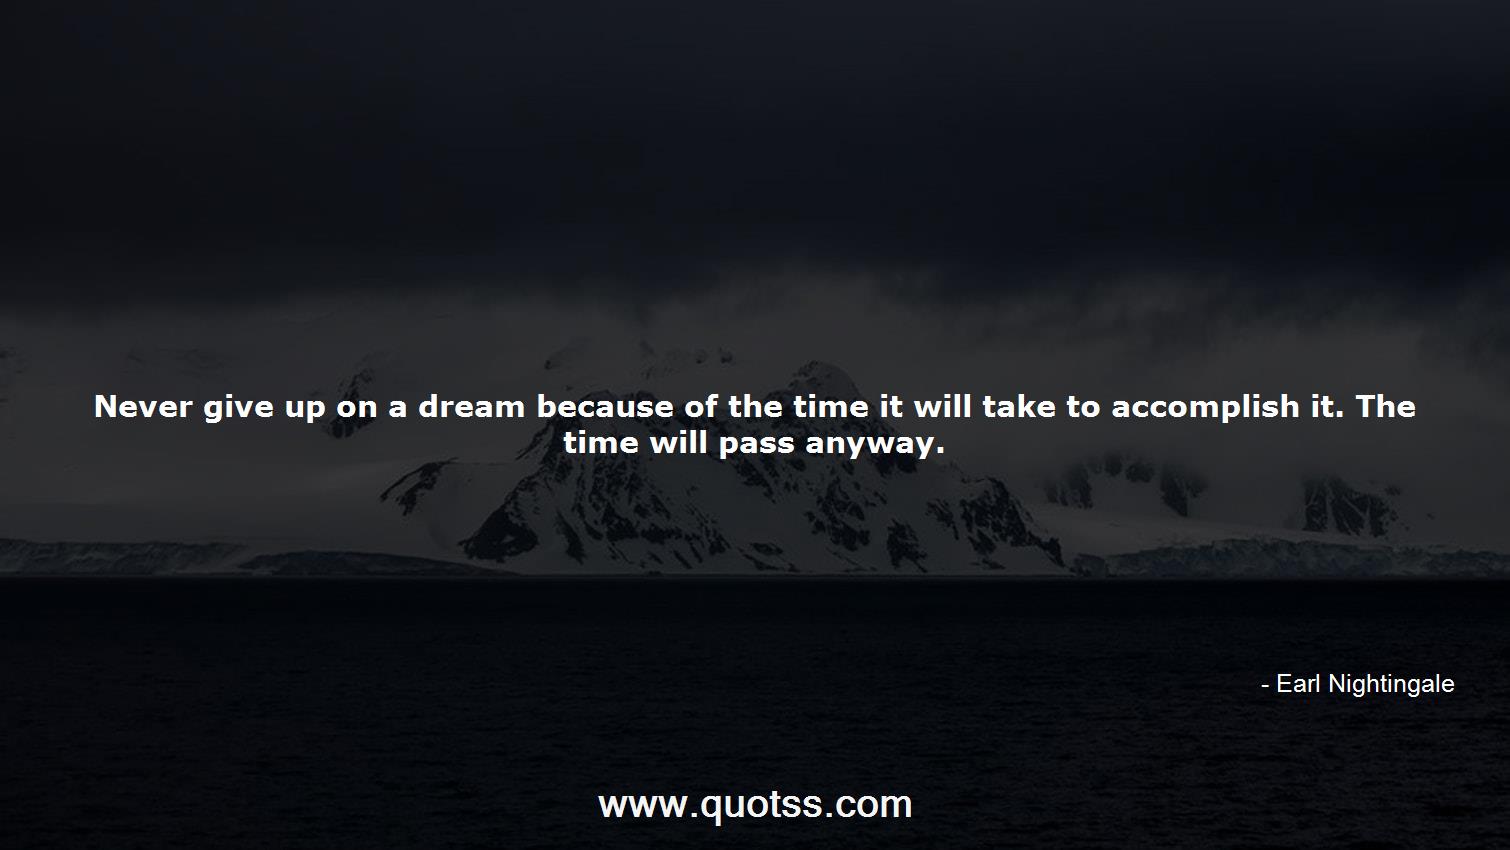 Earl Nightingale Quote on Quotss